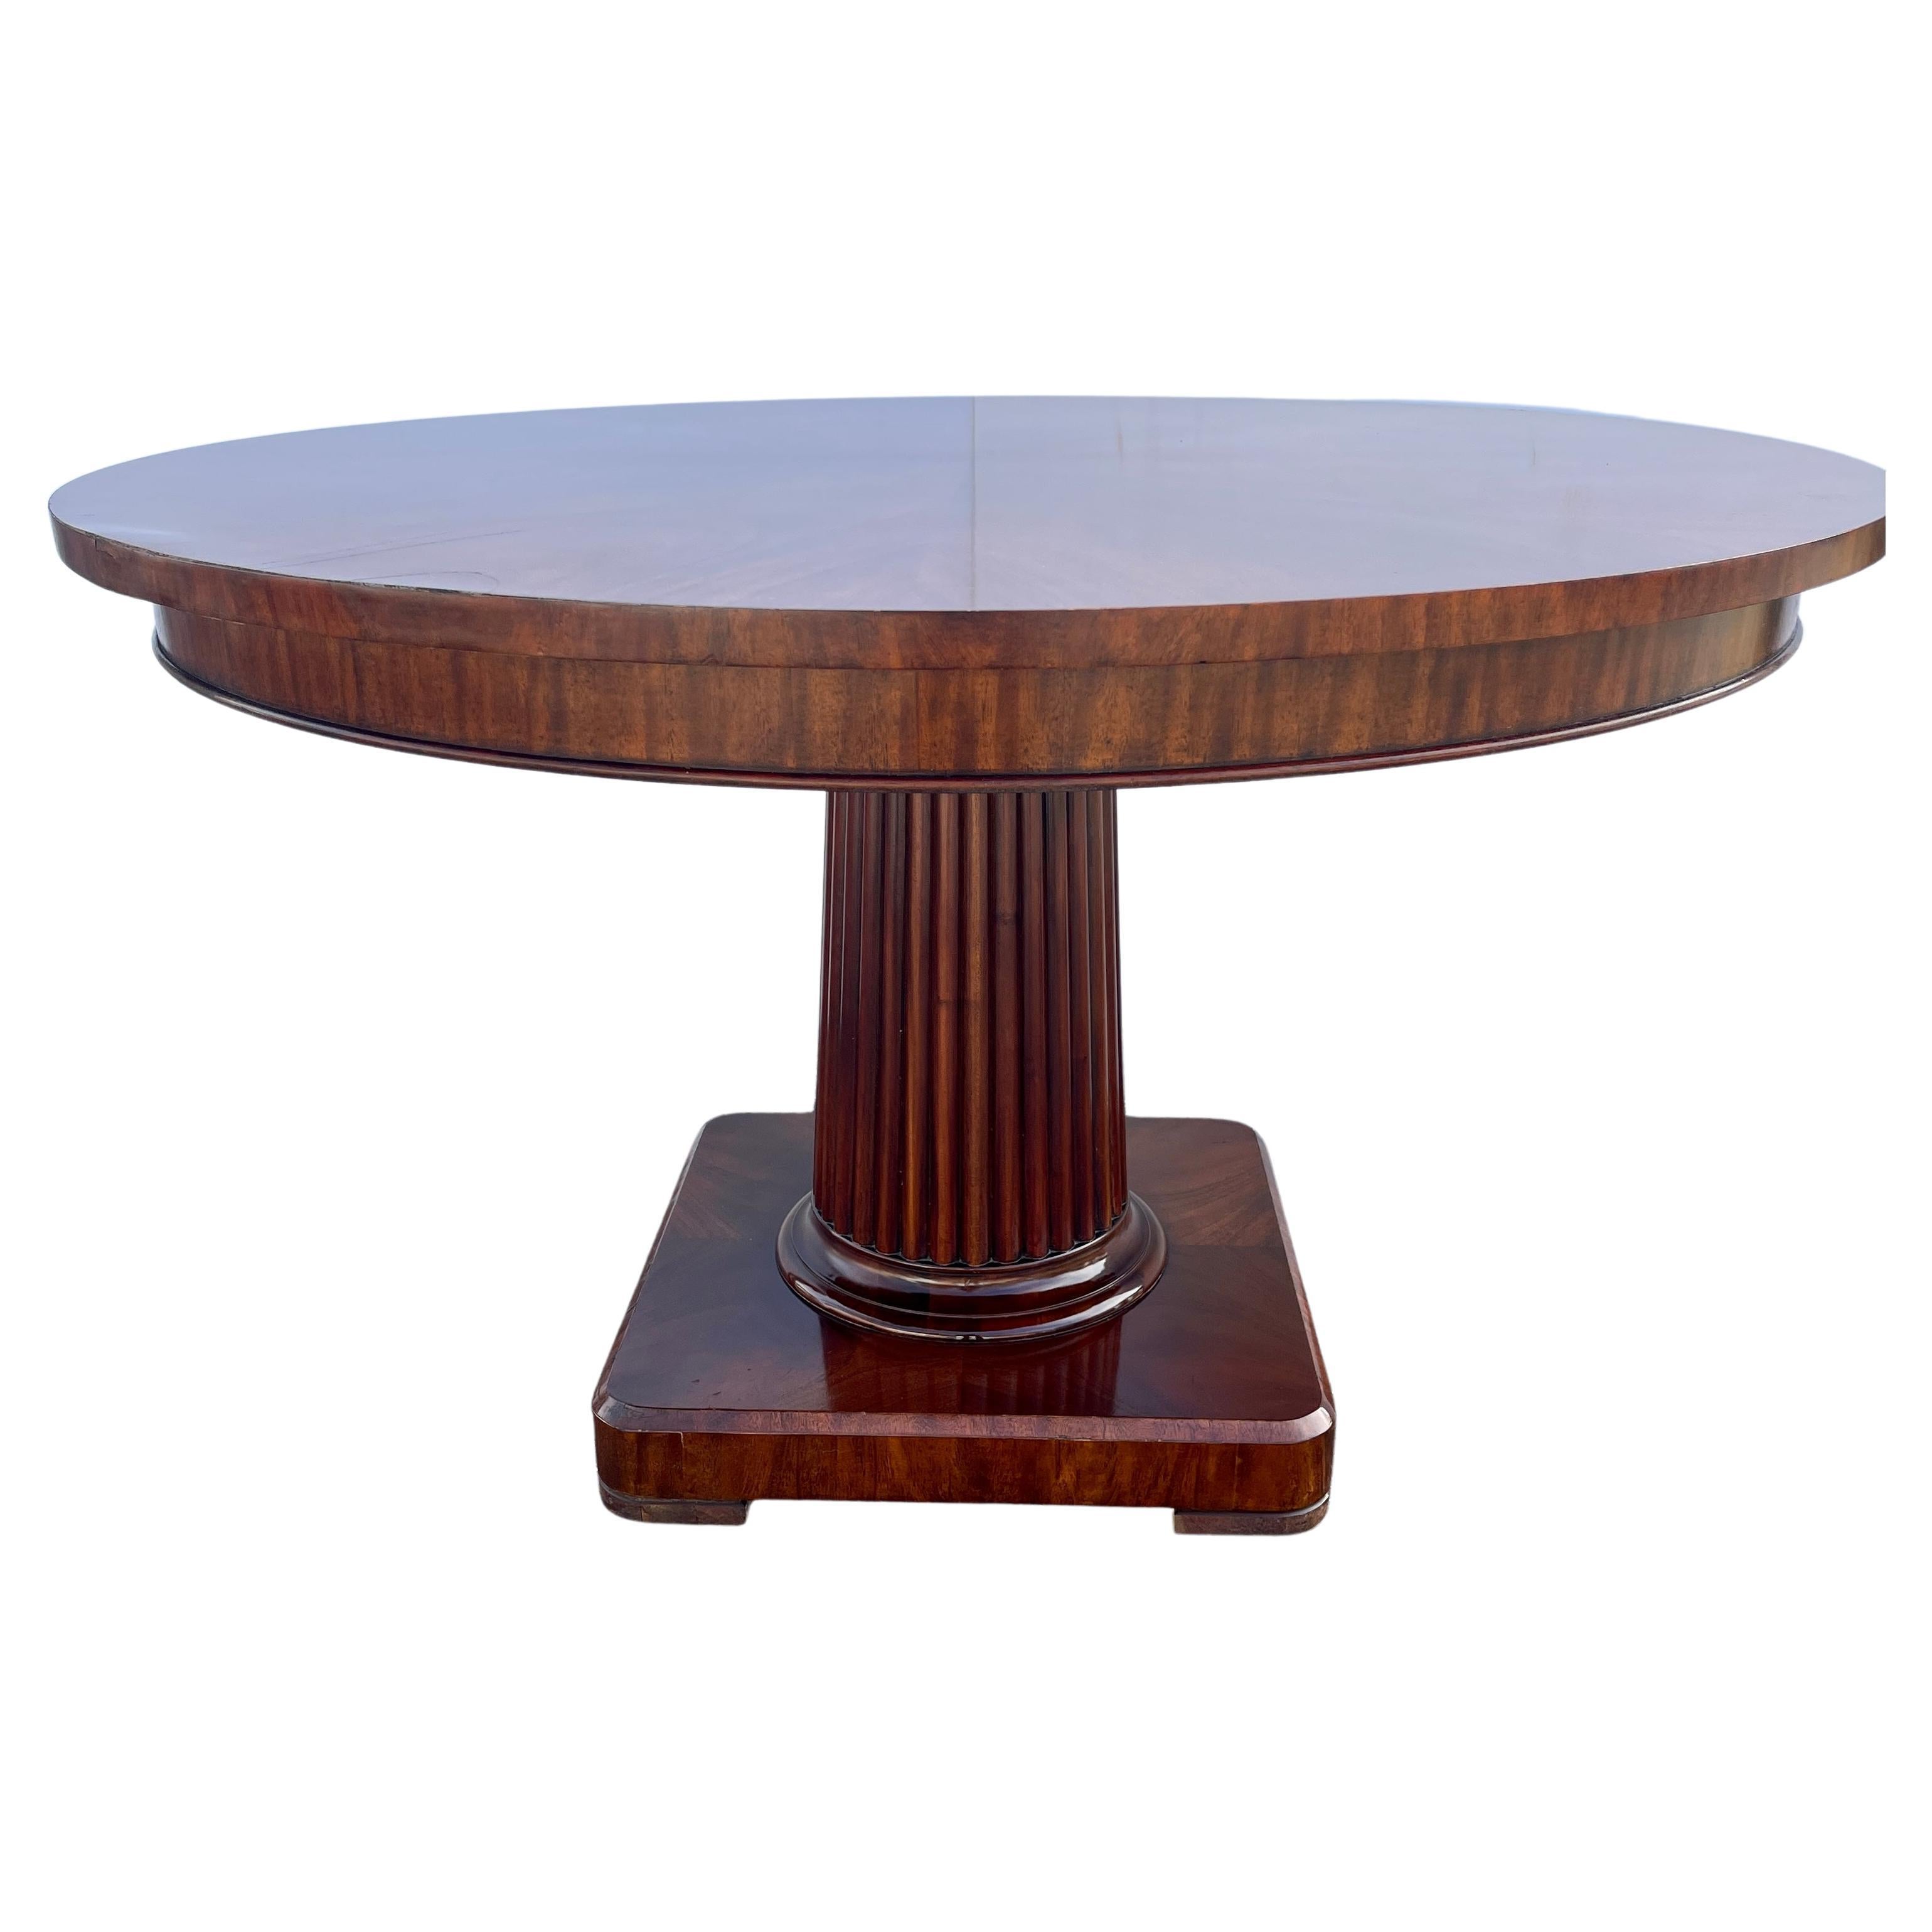 Mahogany round pillar table by Ralph Lauren Fine Furniture Maker.
This bench-made table has been produced and finished with the highest level of hand-craftsmanship. Finely crafted from kiln-dried mahogany wood and hand-selected swirl mahogany wood